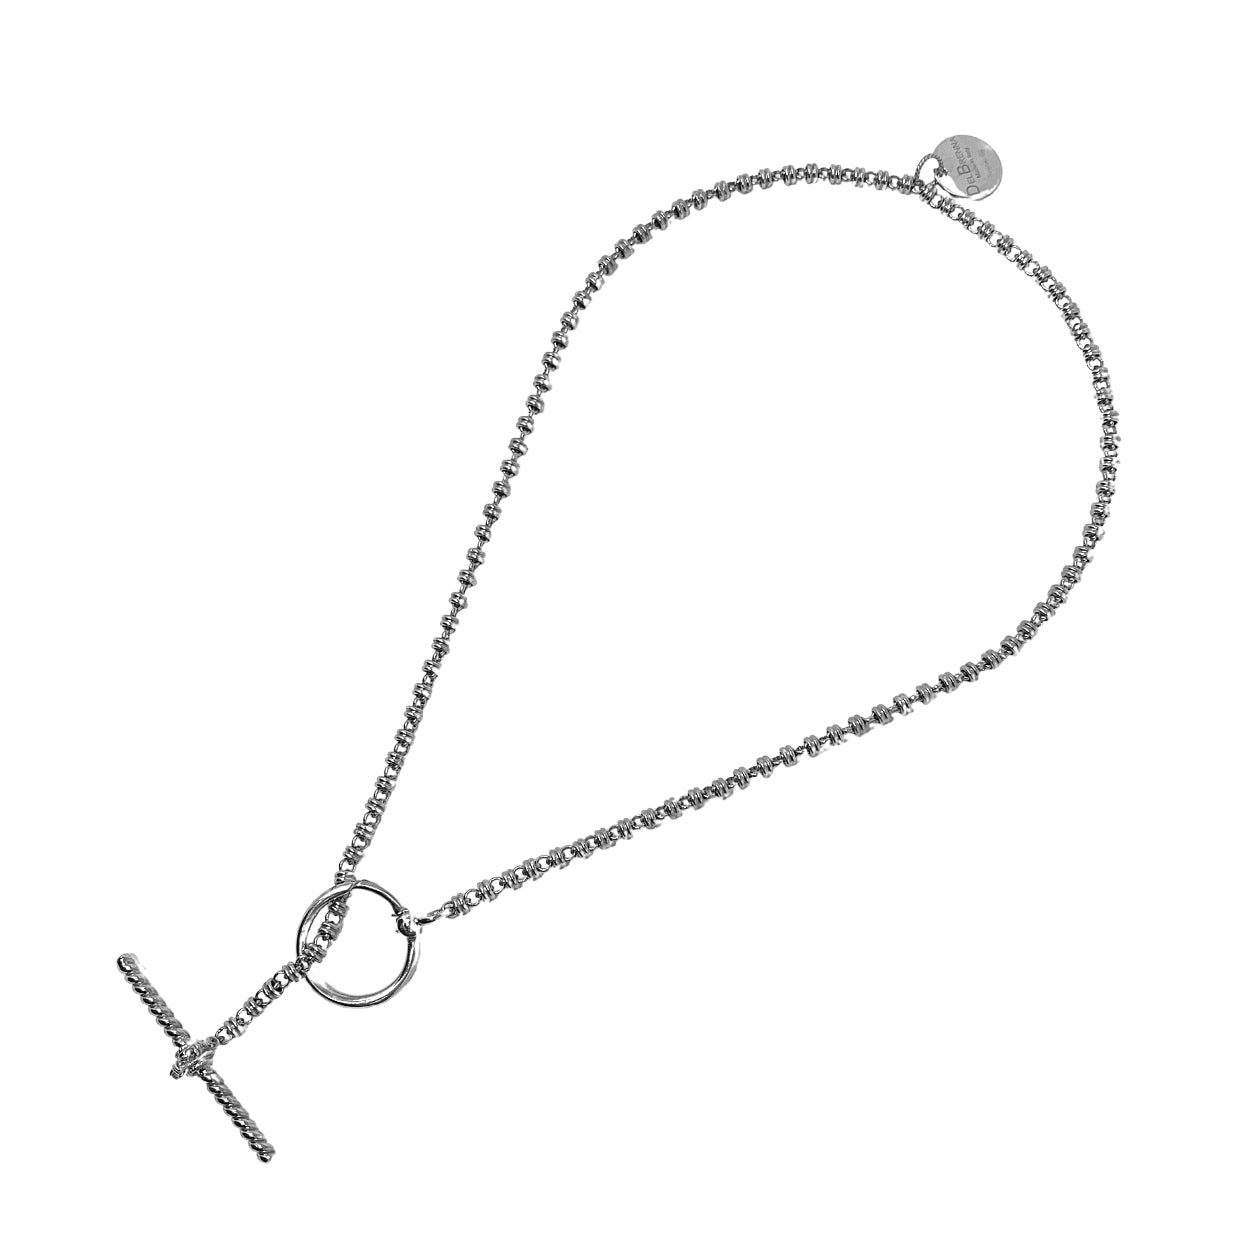 A silver necklace with a toggle clasp to match the silver chain in the necklace - from the Links 3mm collection from DelBrenna Italian Jewelry designers and artisans. Hand-crafted in Tuscany.